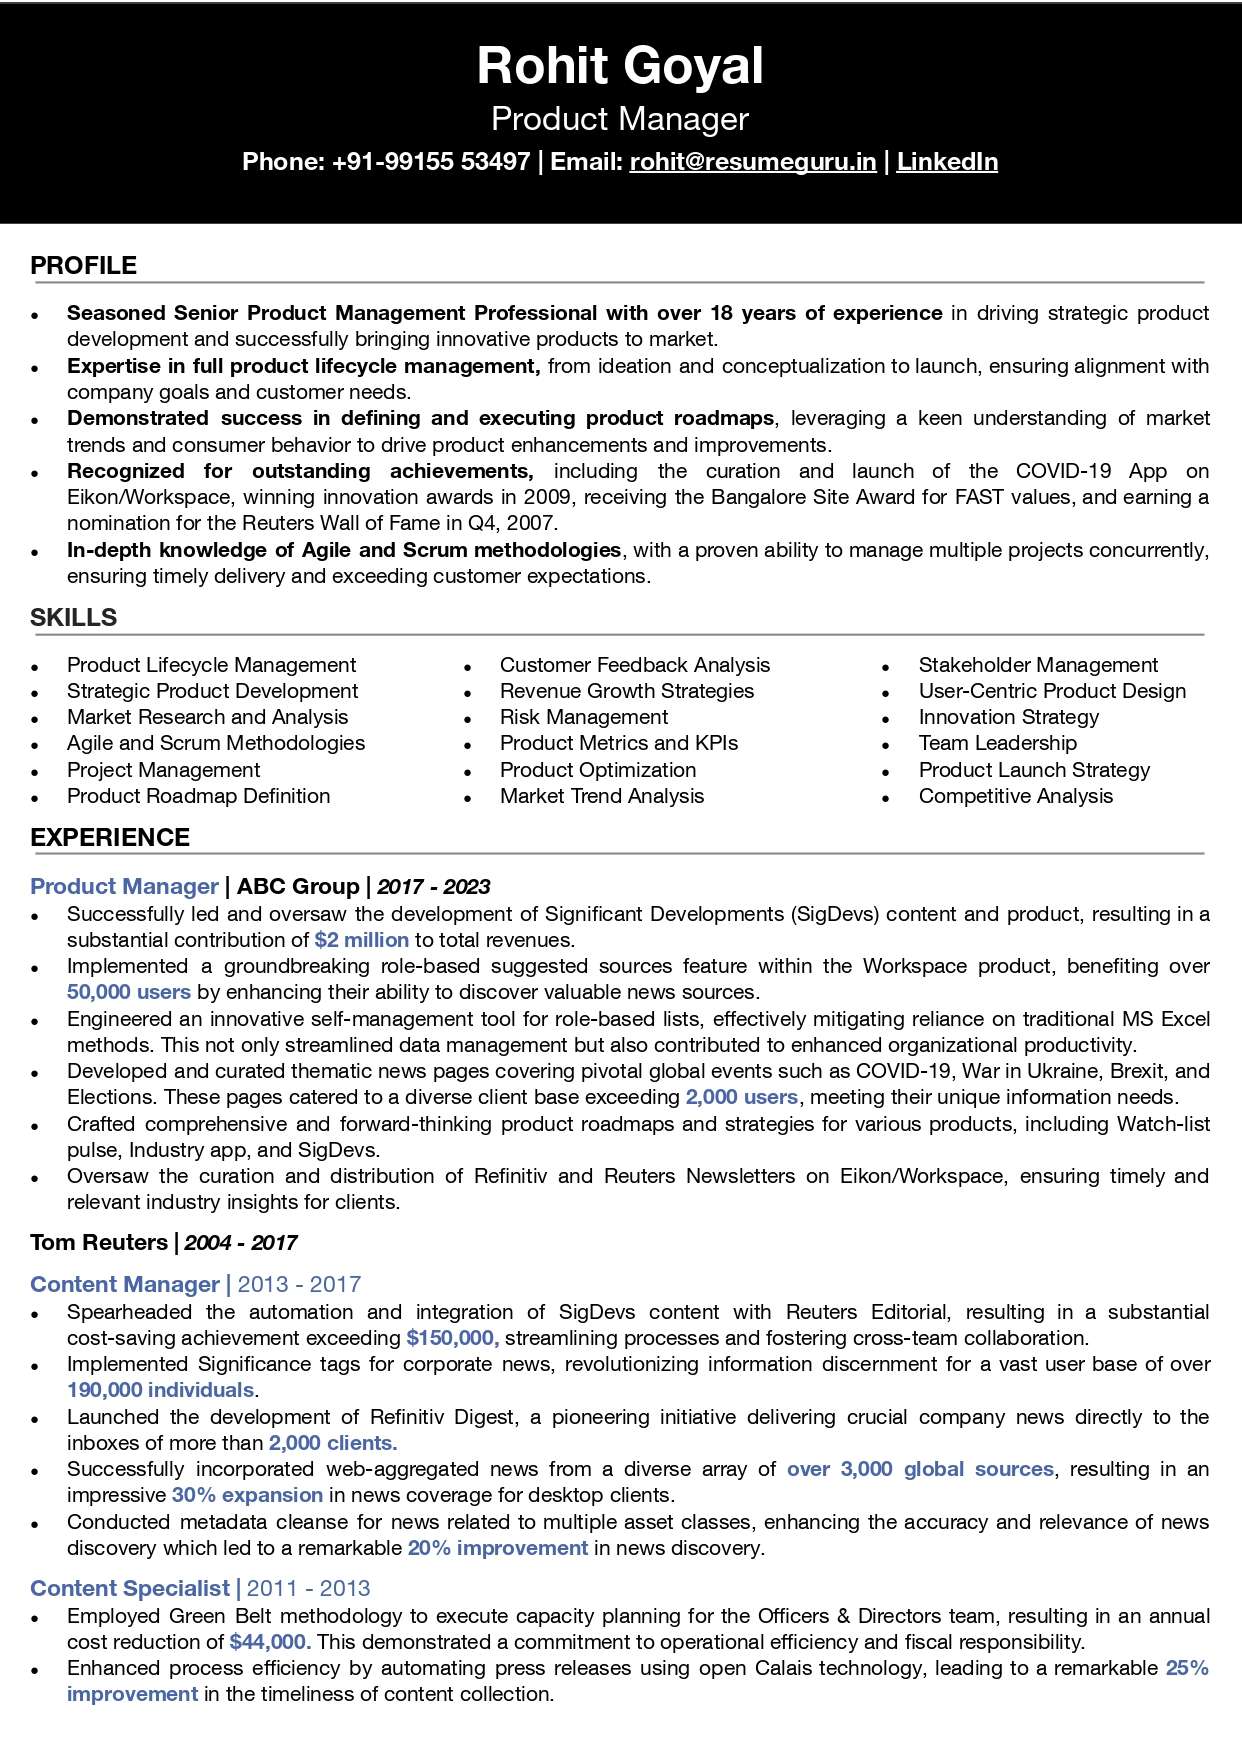 Senior Product Manager Resume Sample_page-0001